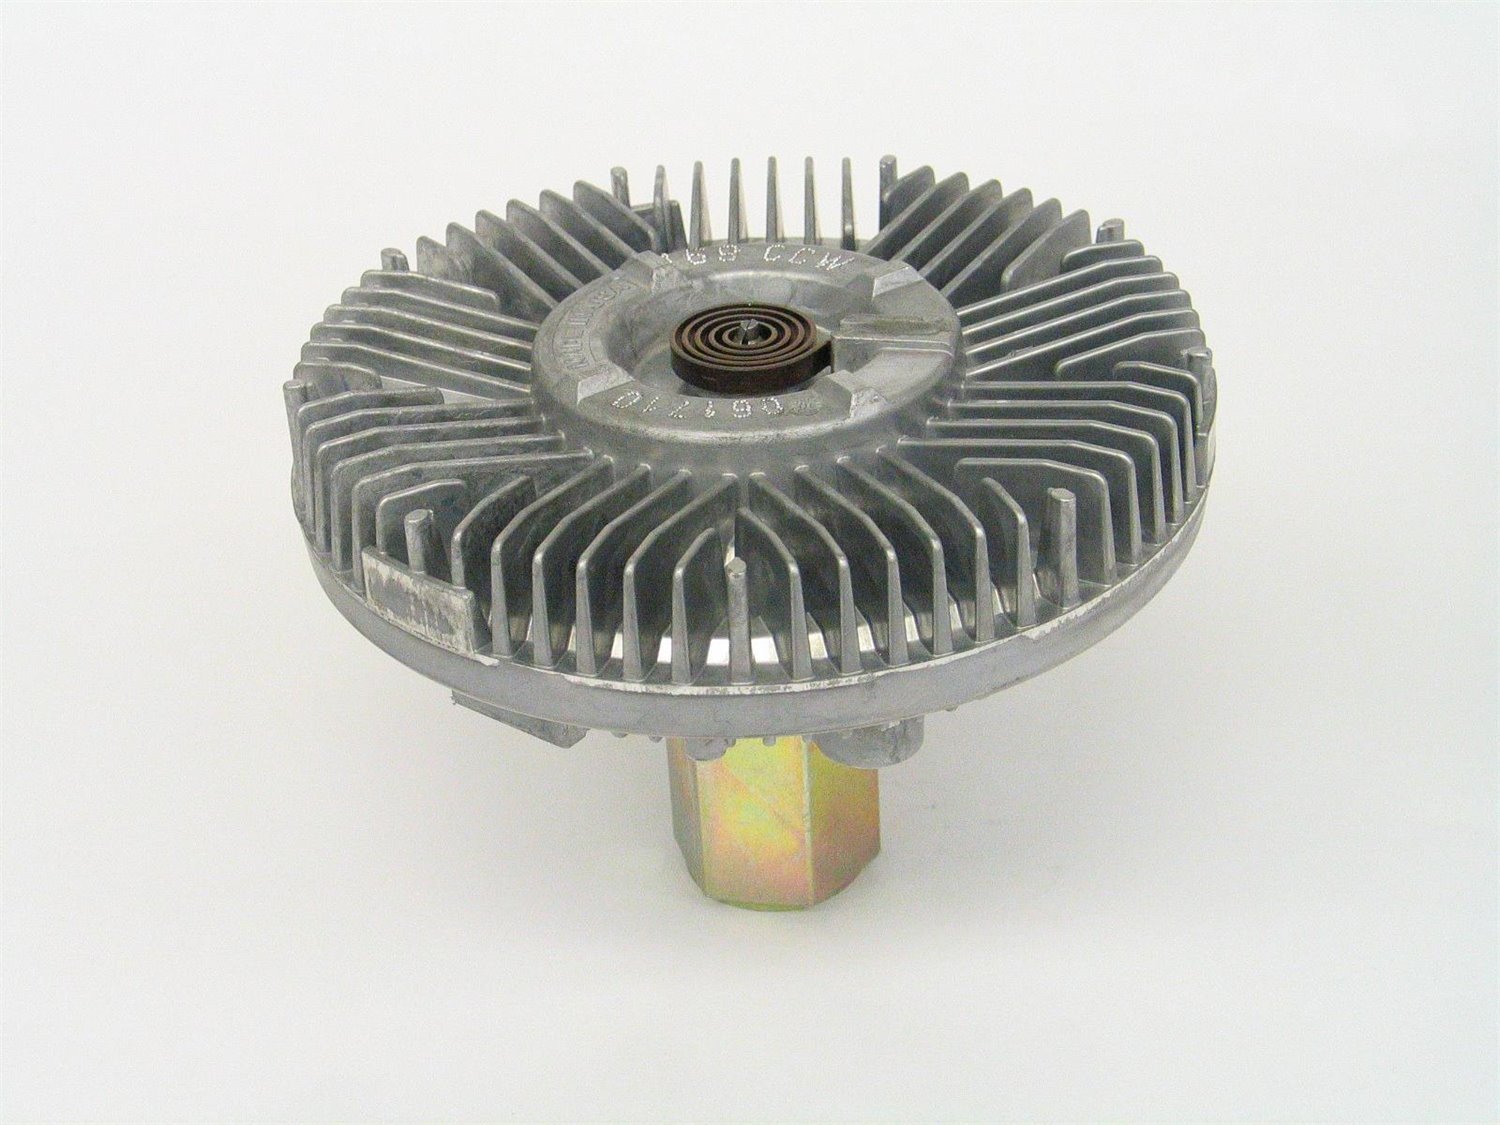 Heavy Duty Thermal Fan Clutch for 1992-2006 Ford Crown Victoria 4.6L V8 & 2008-2010 Ford Super Duty 5.4L V8